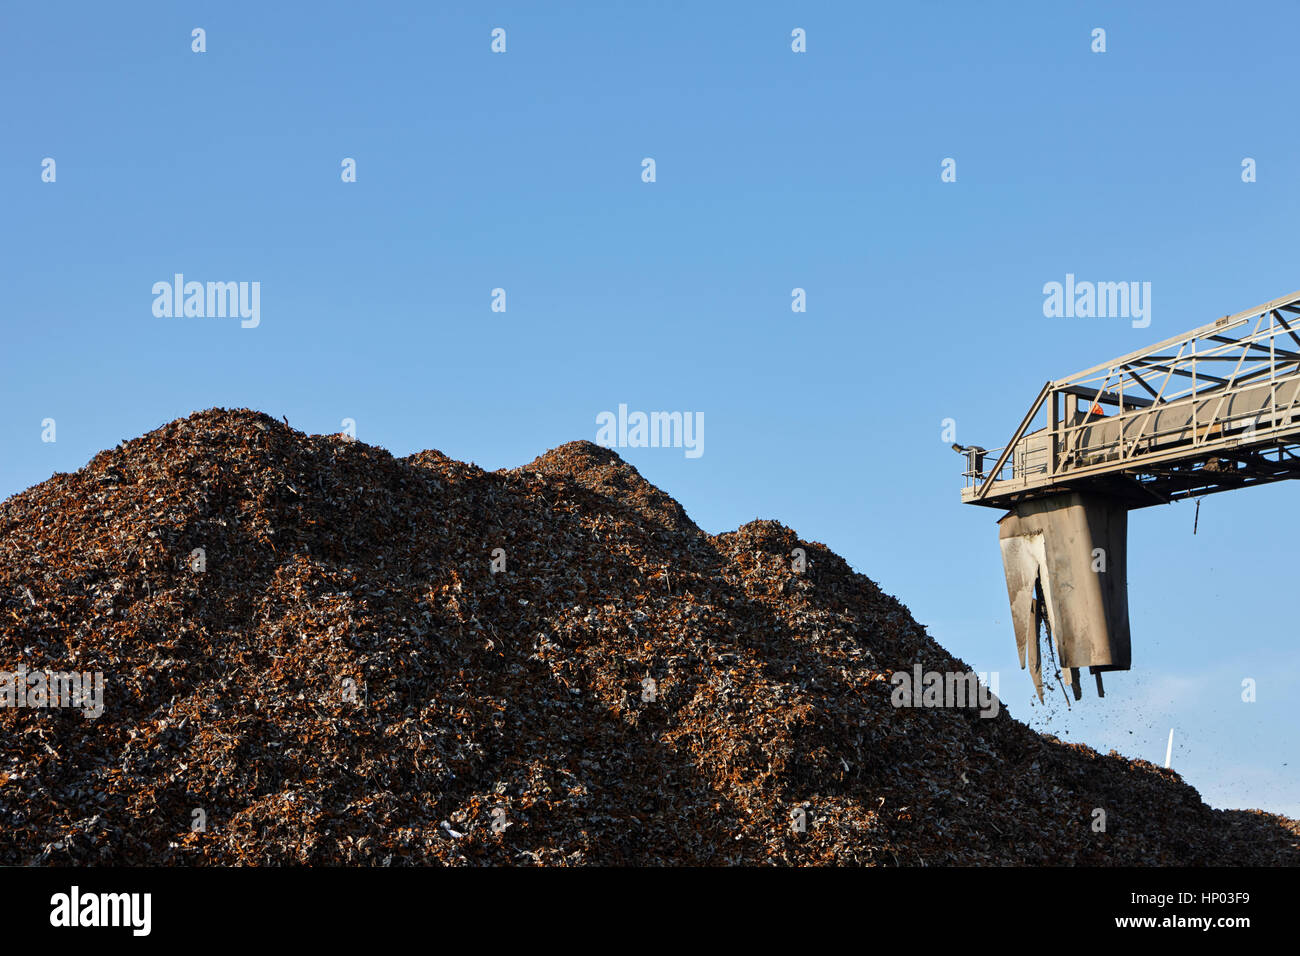 processing ferrous metals at metal recycling plant liverpool uk Stock Photo